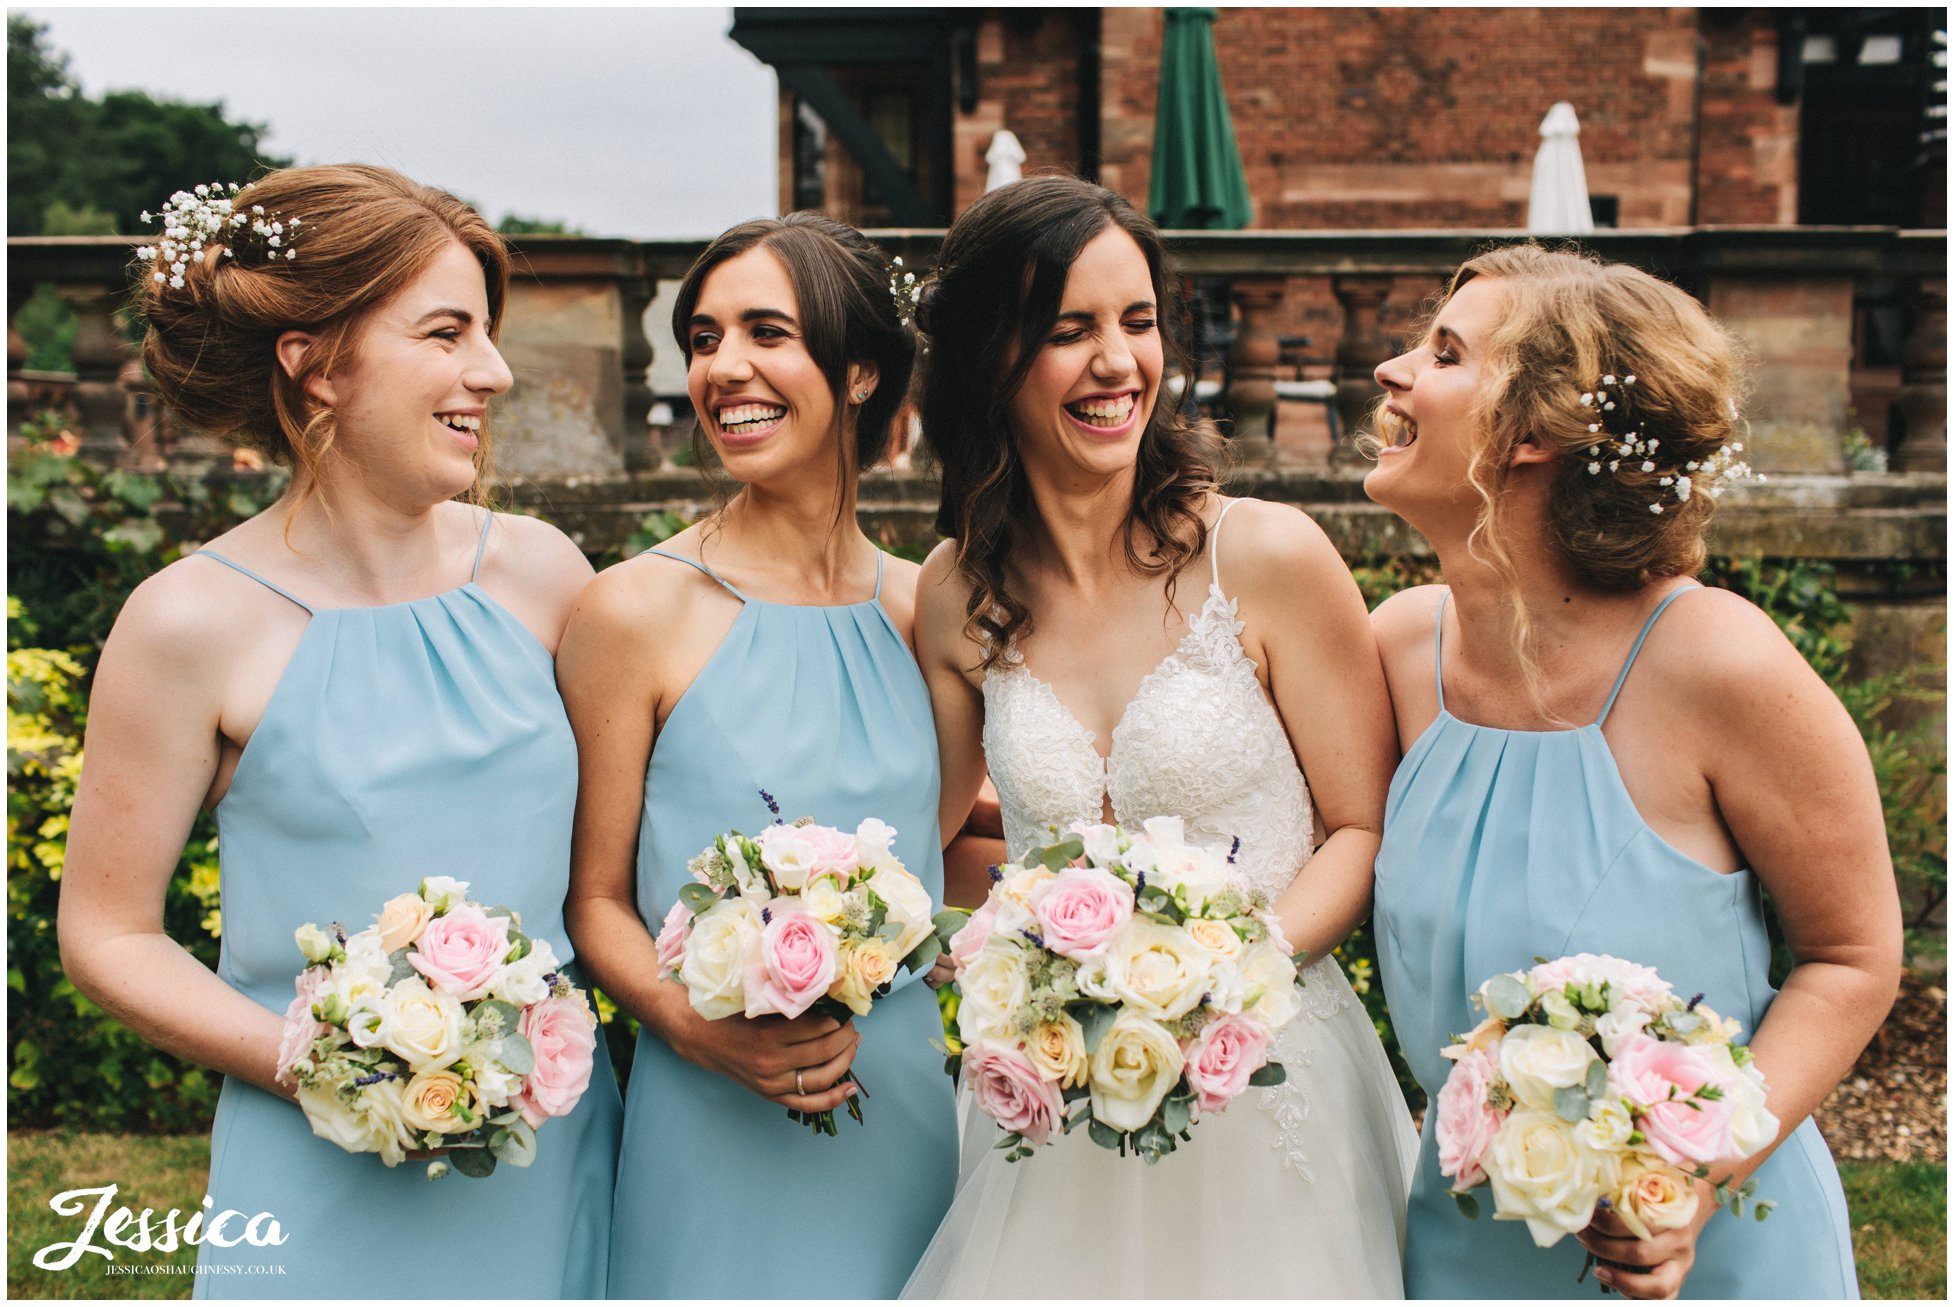 the bride laughs with her bridesmaids